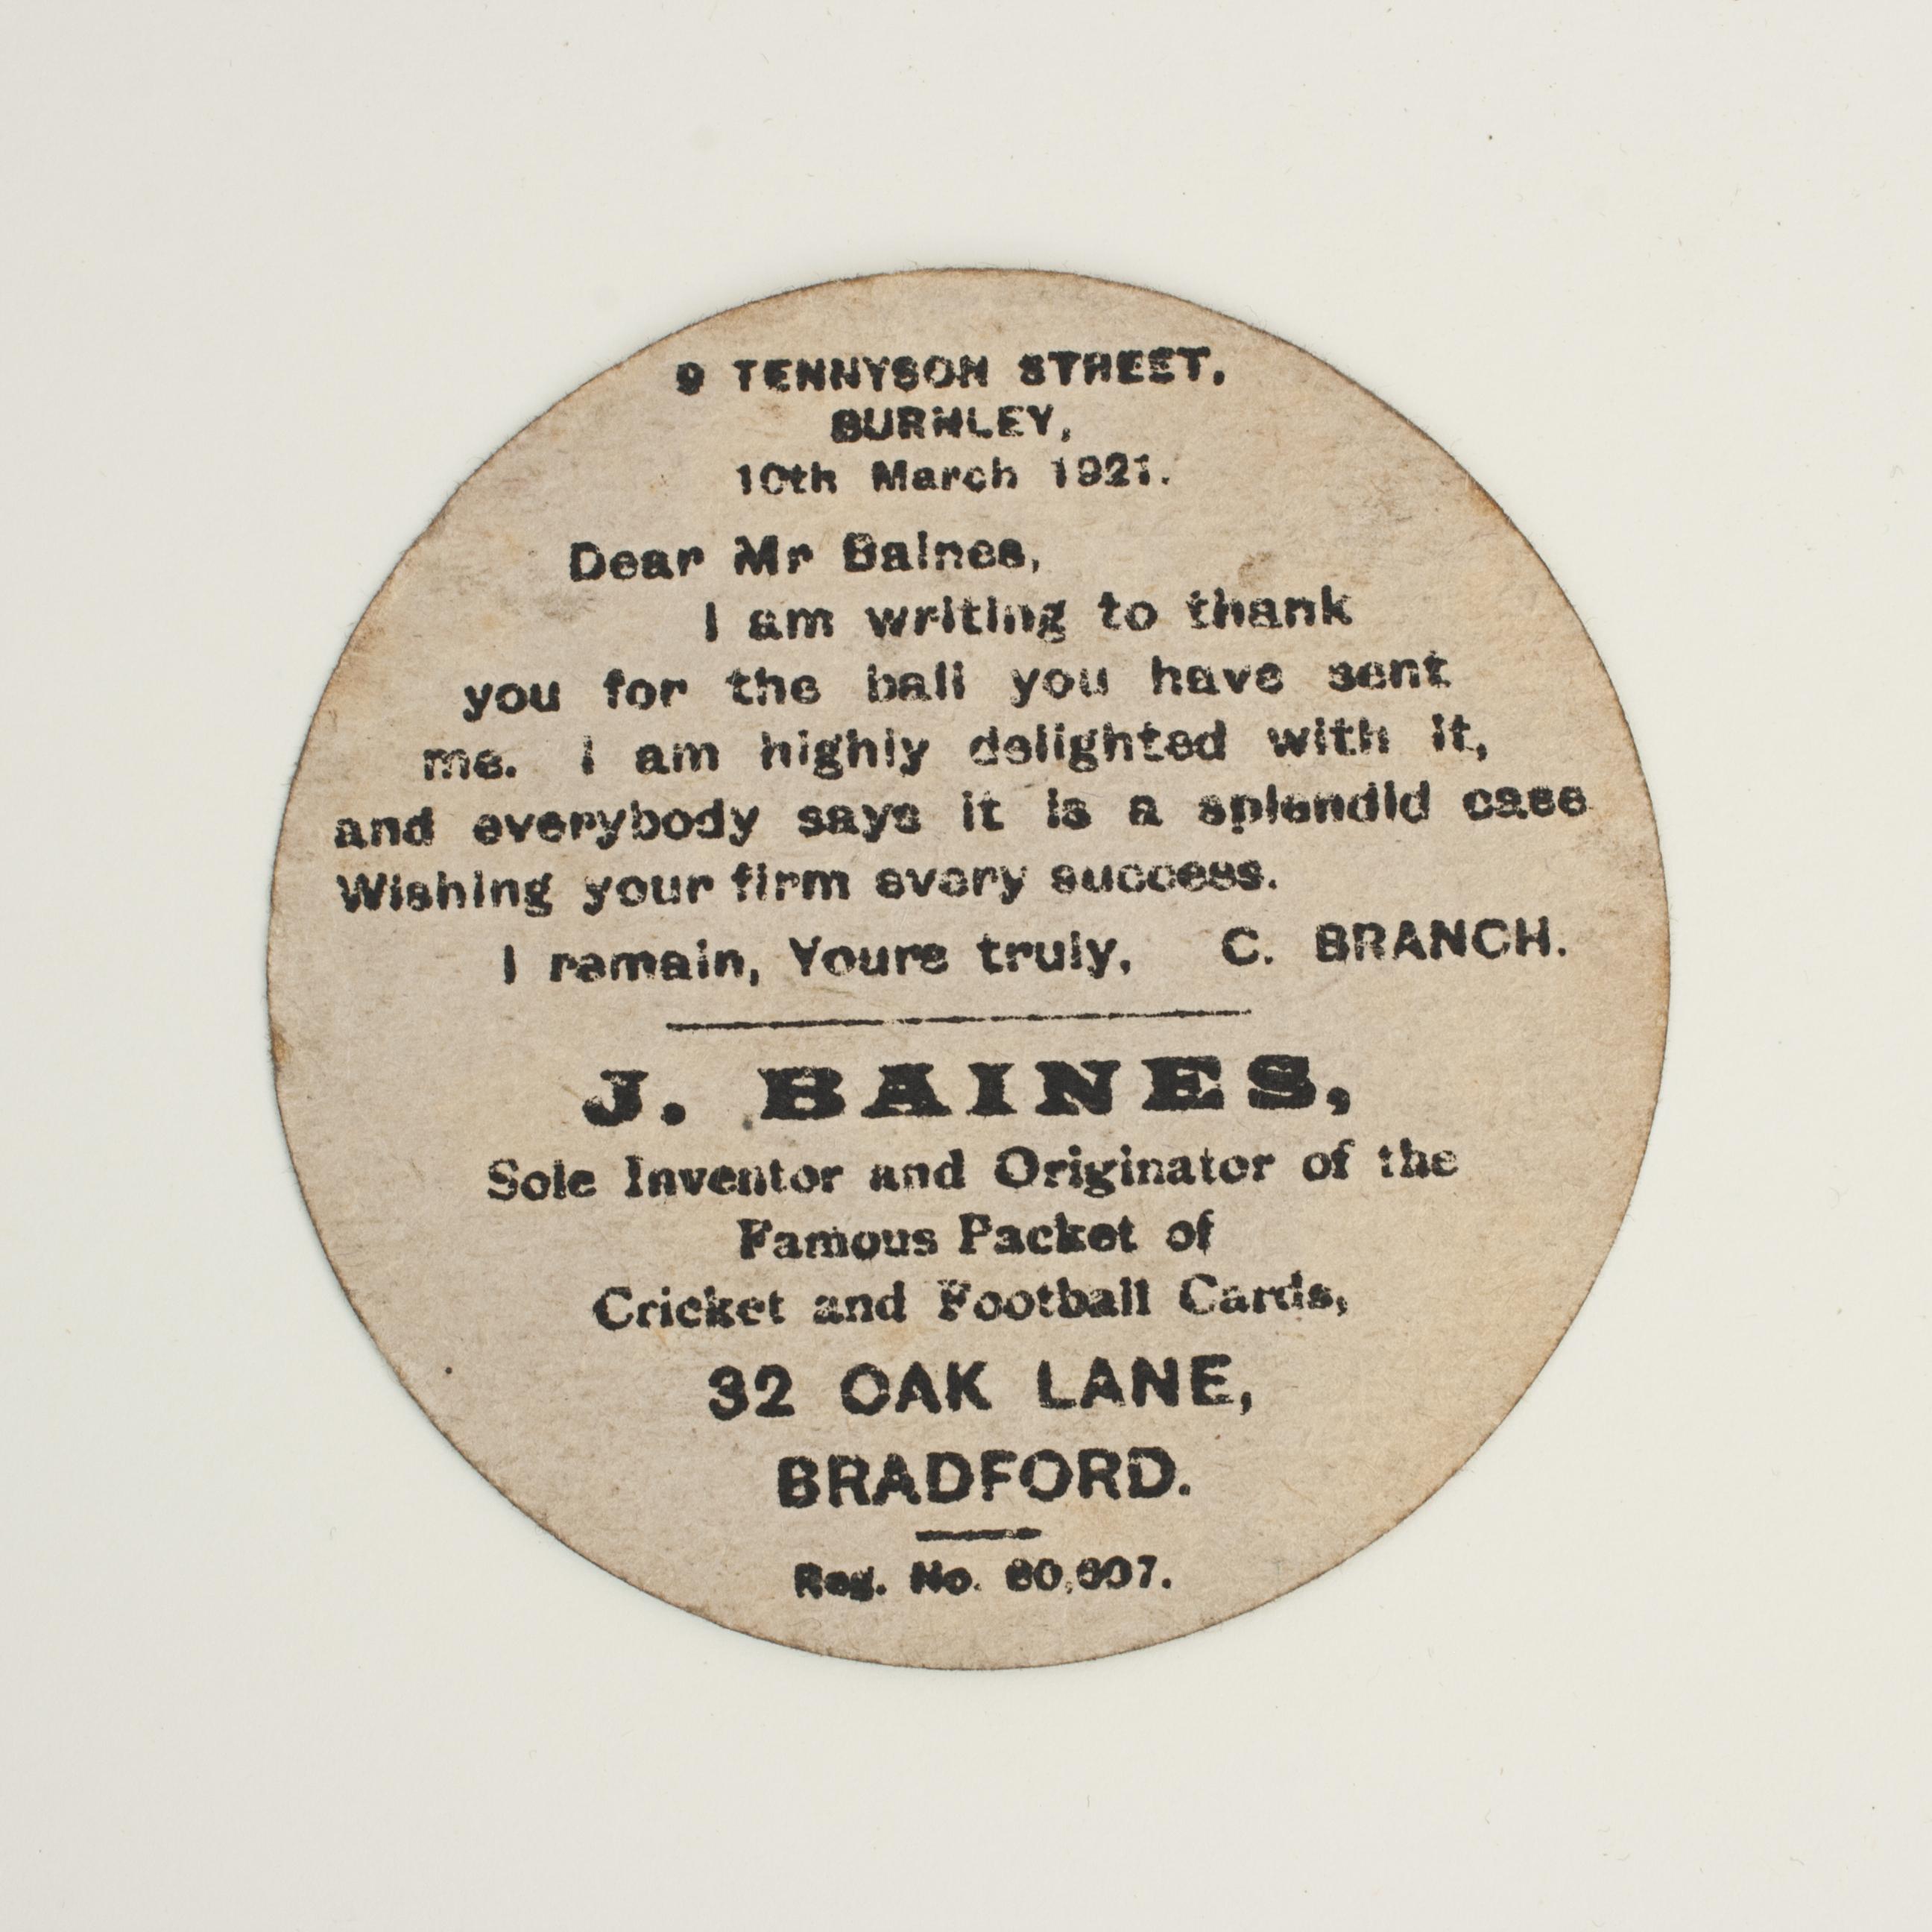 Baines golfing trade card, North Berwick.
A rare circular golf trade card in the shape of a bramble golf ball. Made by the toy shop owner from Bradford, John Baines. Baines went on to produce not only football cards but eventually covered scores of